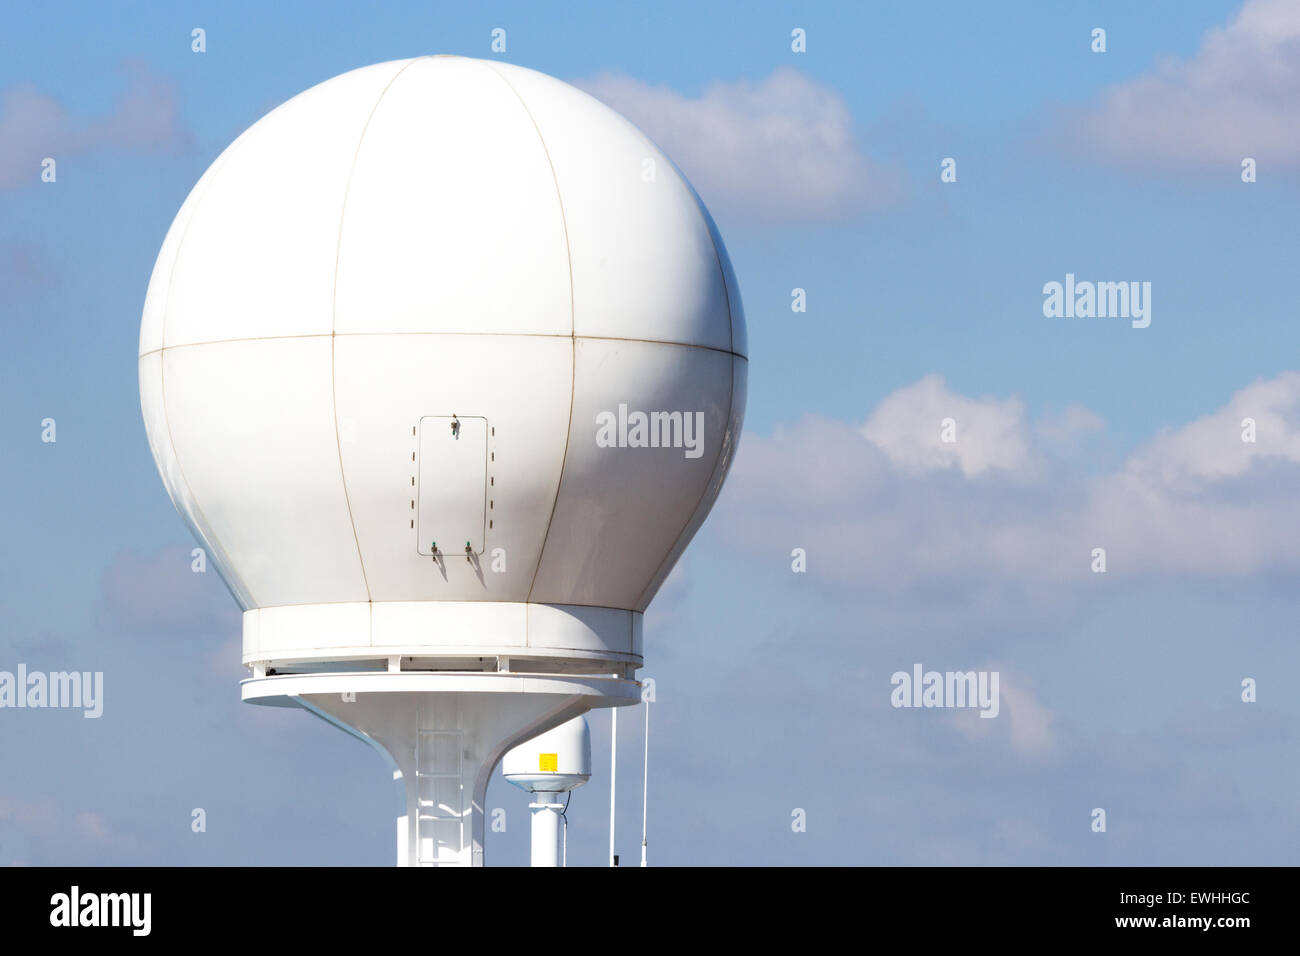 Ship radar dome. The dome protects the delicate electronics of the radar. Stock Photo